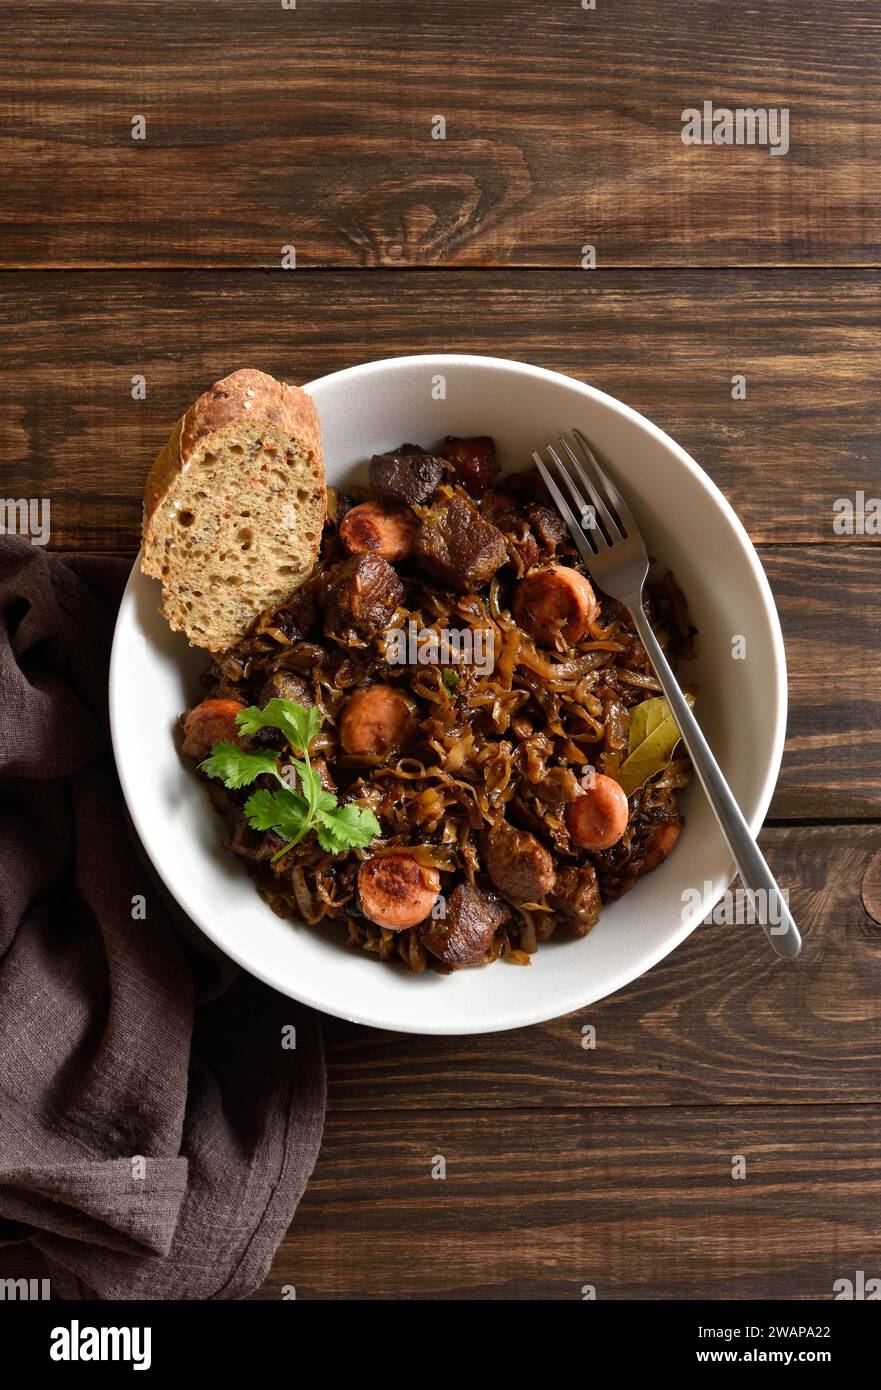 Stewed cabbage (polish bigos) with sauerkraut, mushrooms, smoked meats and spices in bowl over wooden background. Top view, flat lay Stock Photo